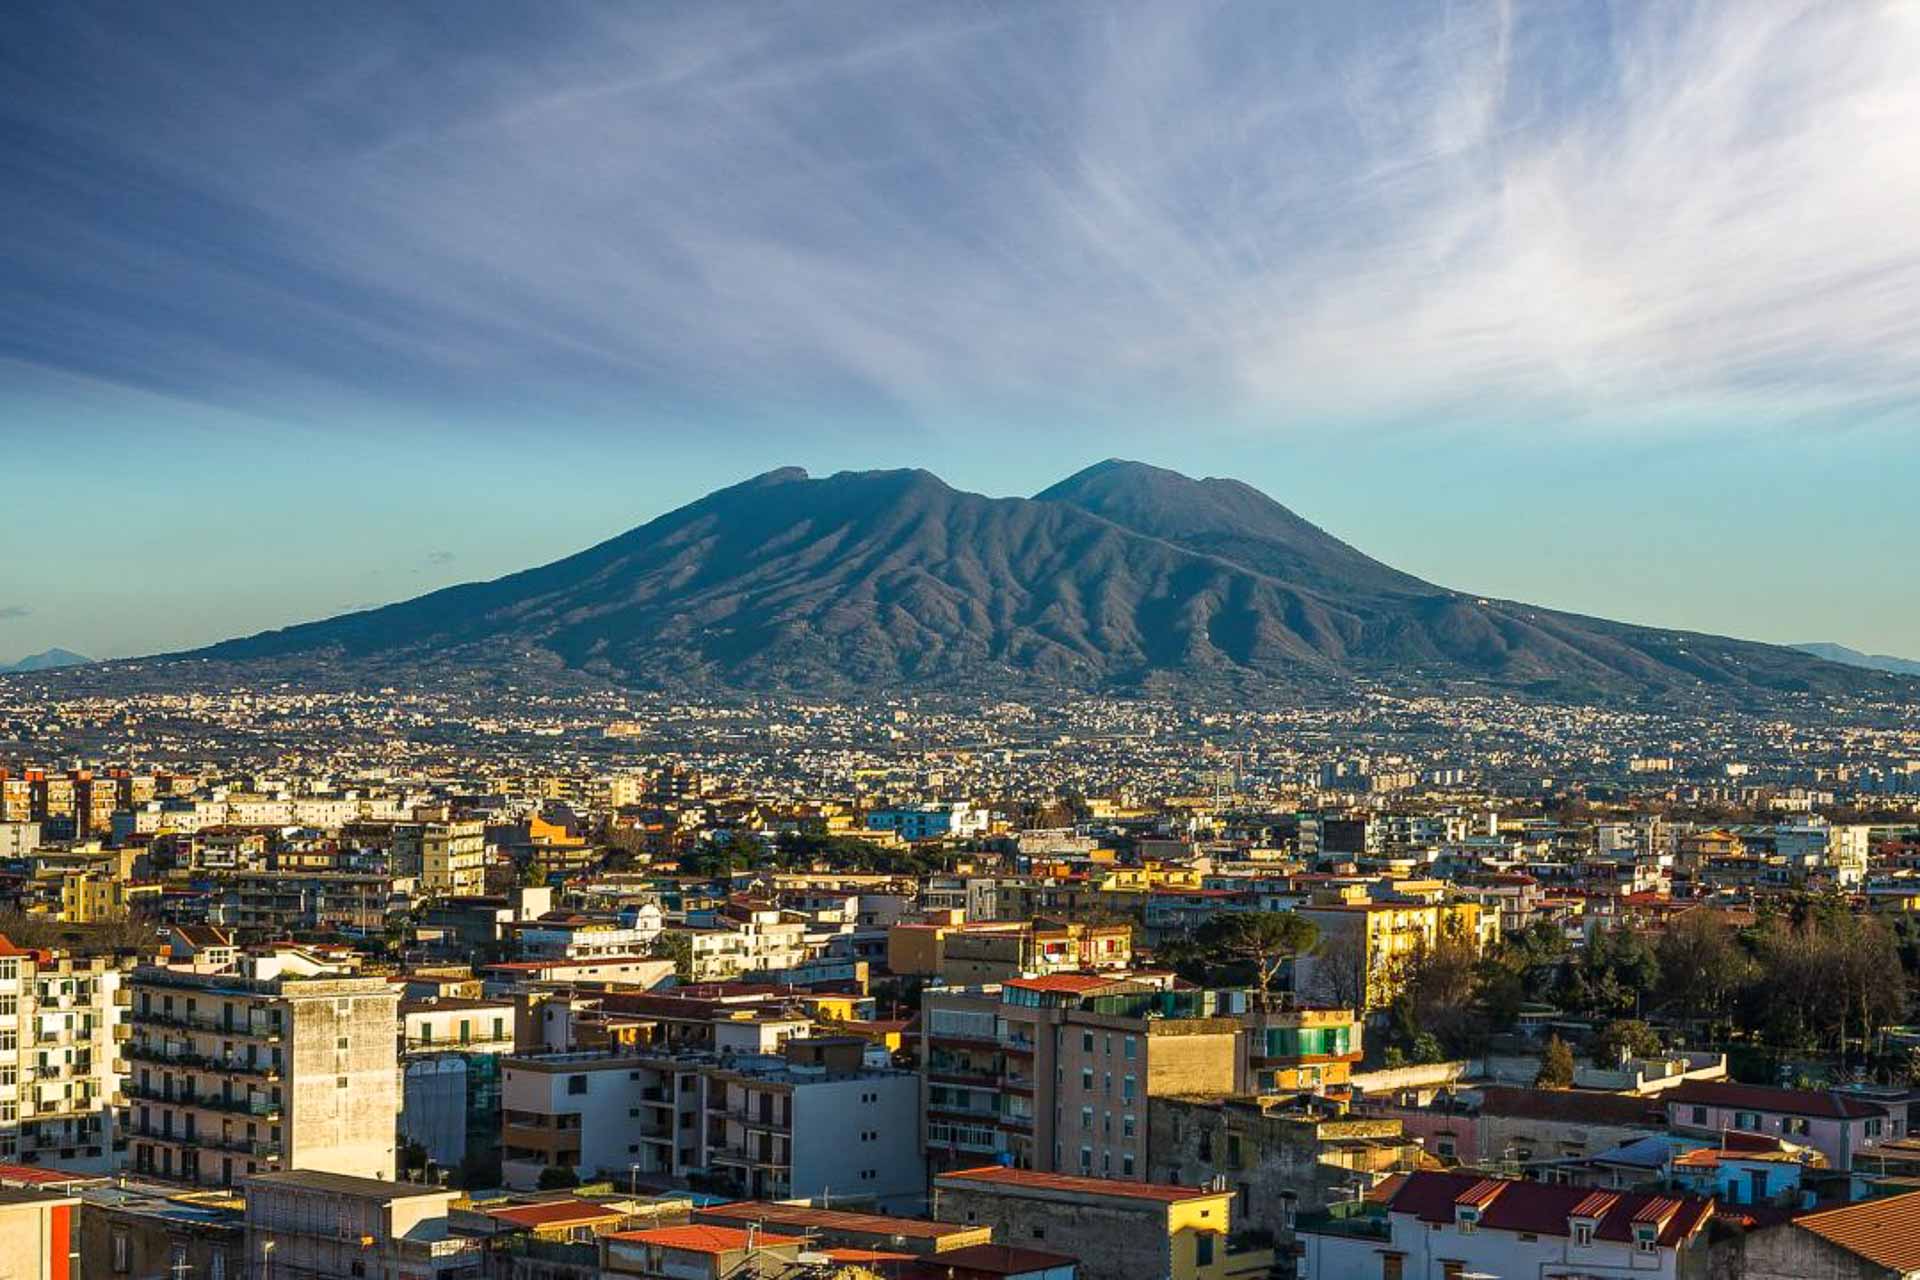 An overview of Naples with a large mountain in the background